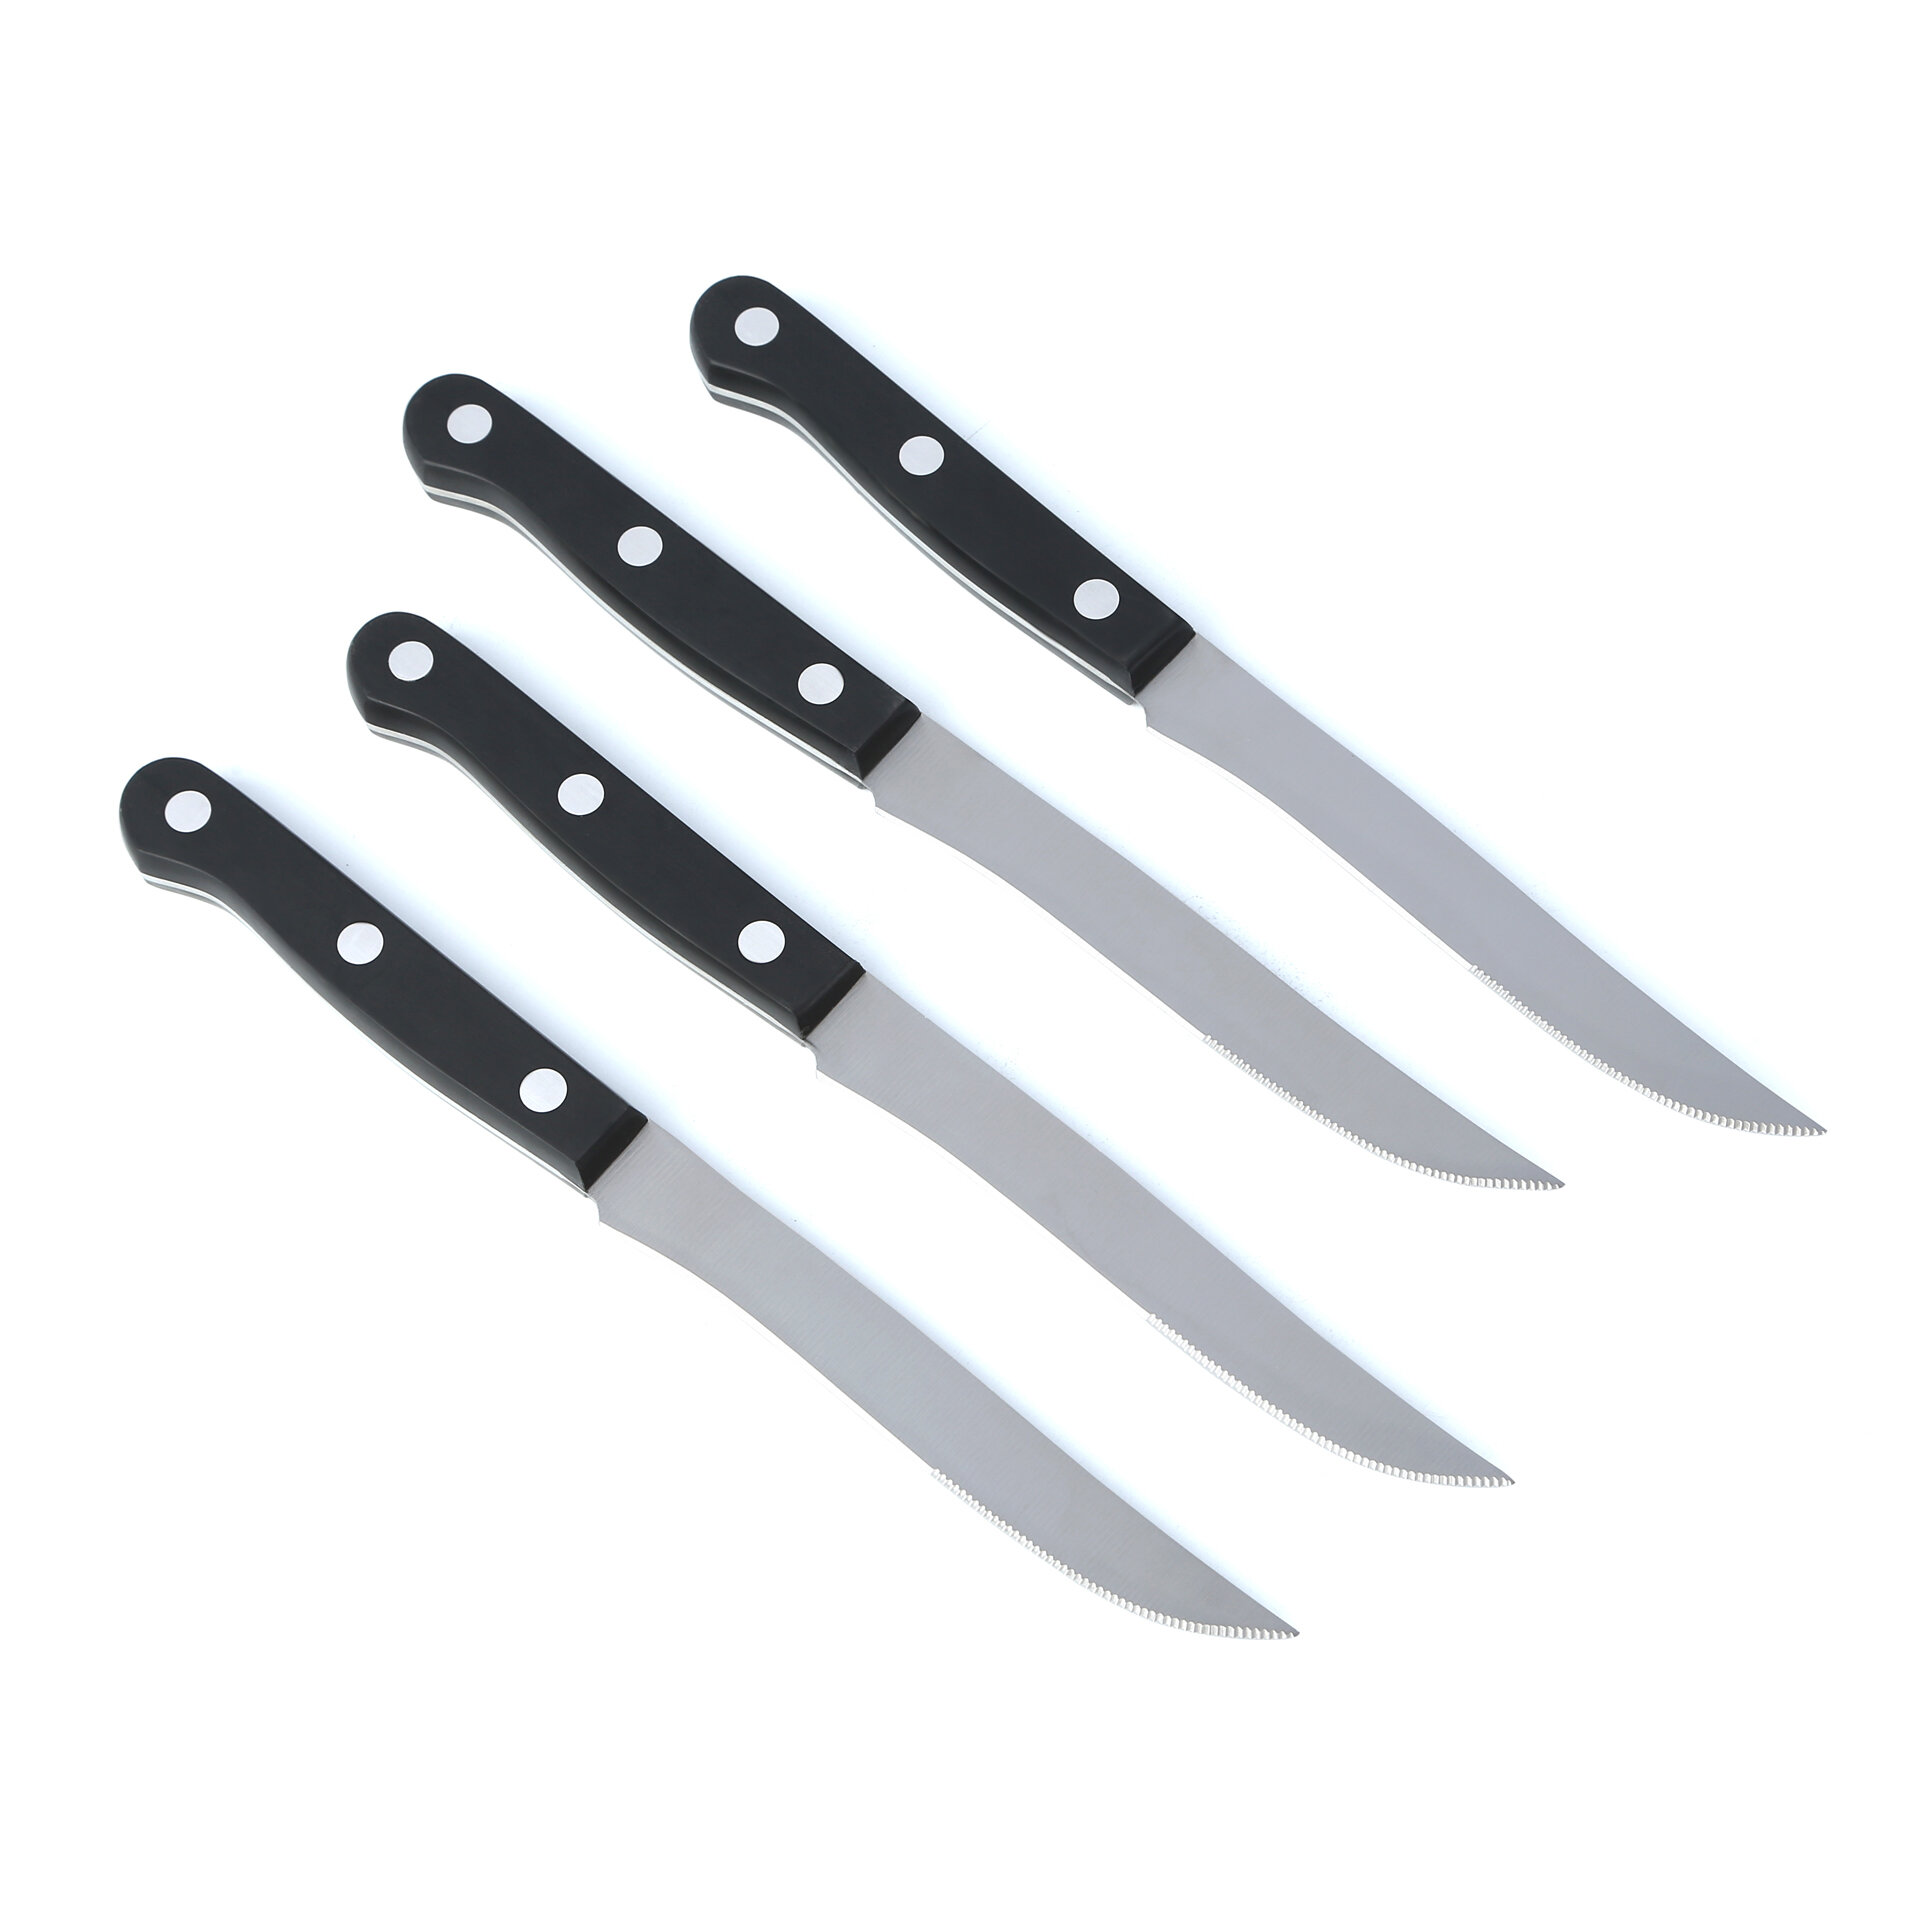 TWIN Gourmet 4-Piece Steak Knife Set by Zwilling J.A. Henckels at